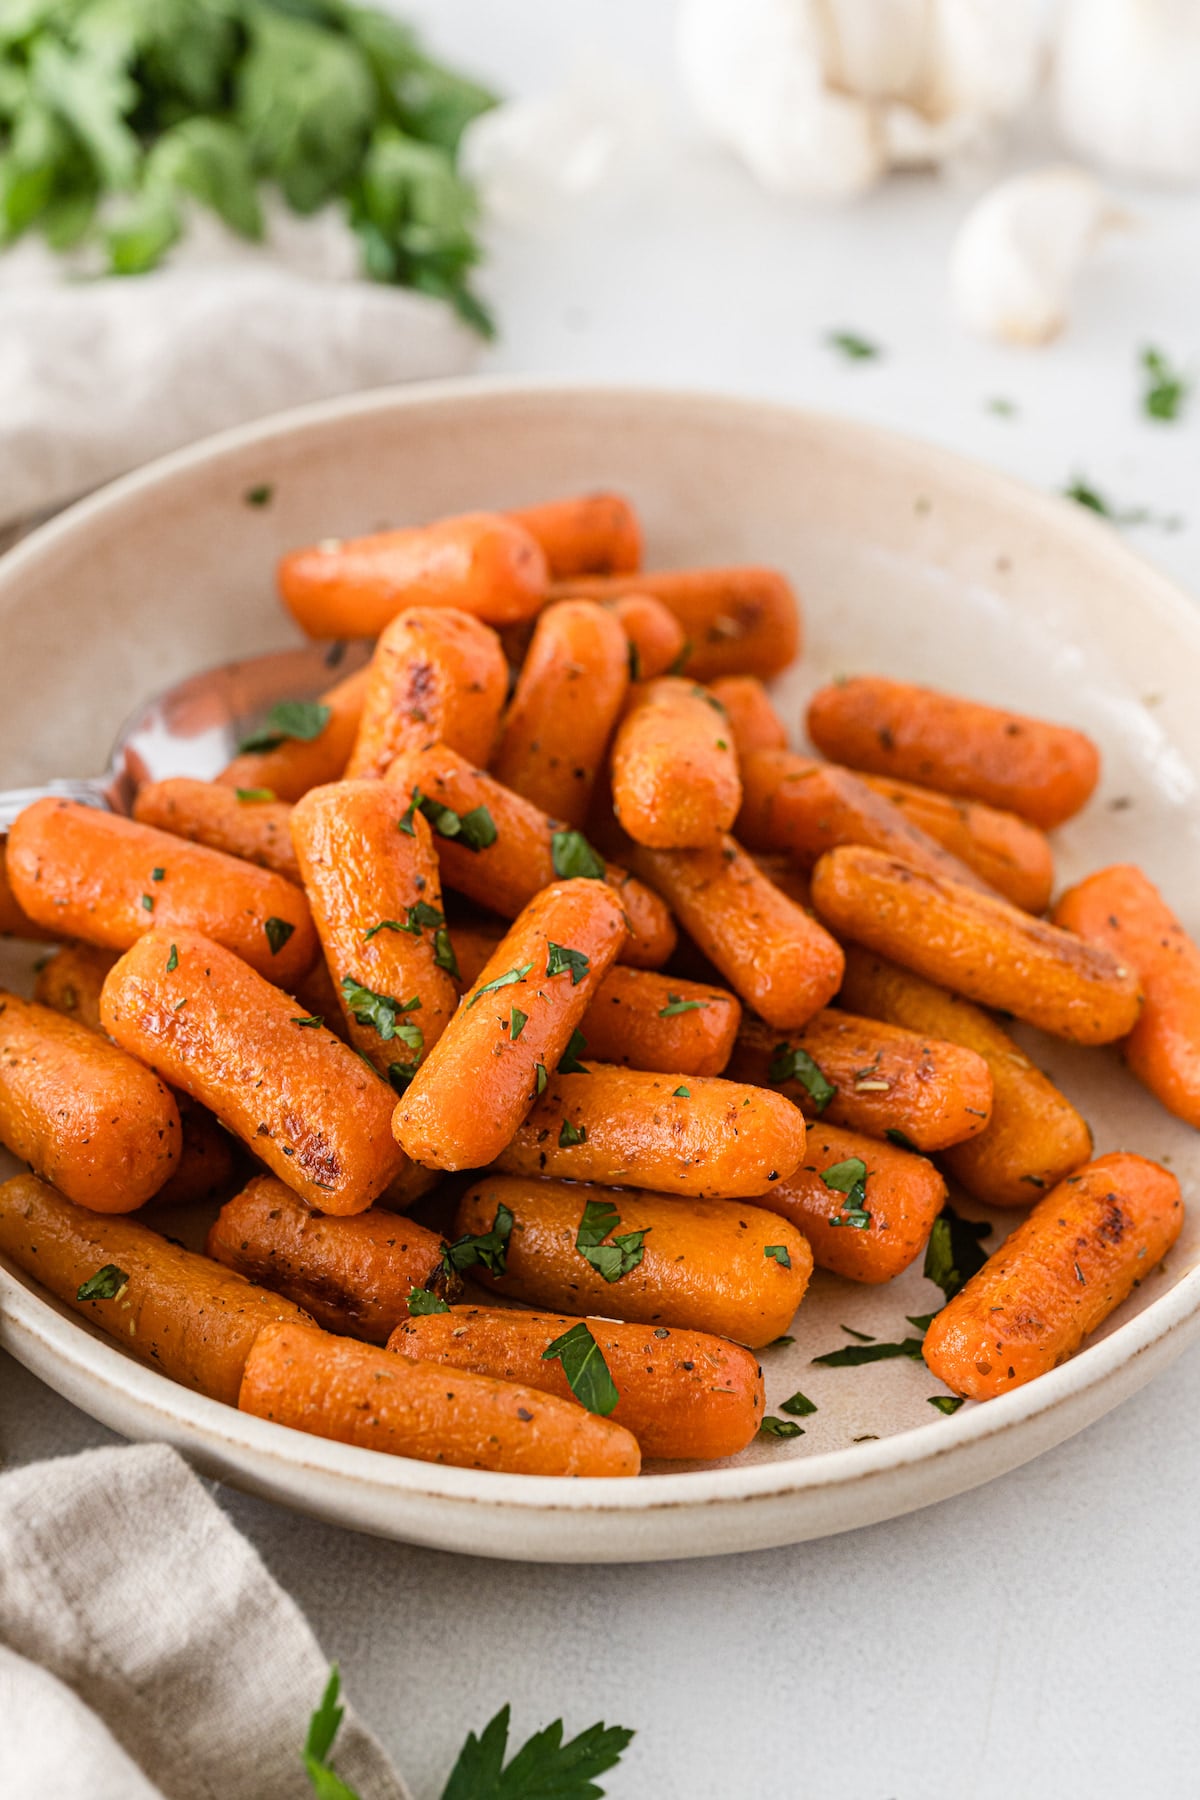 Roasted carrots in a white serving bowl